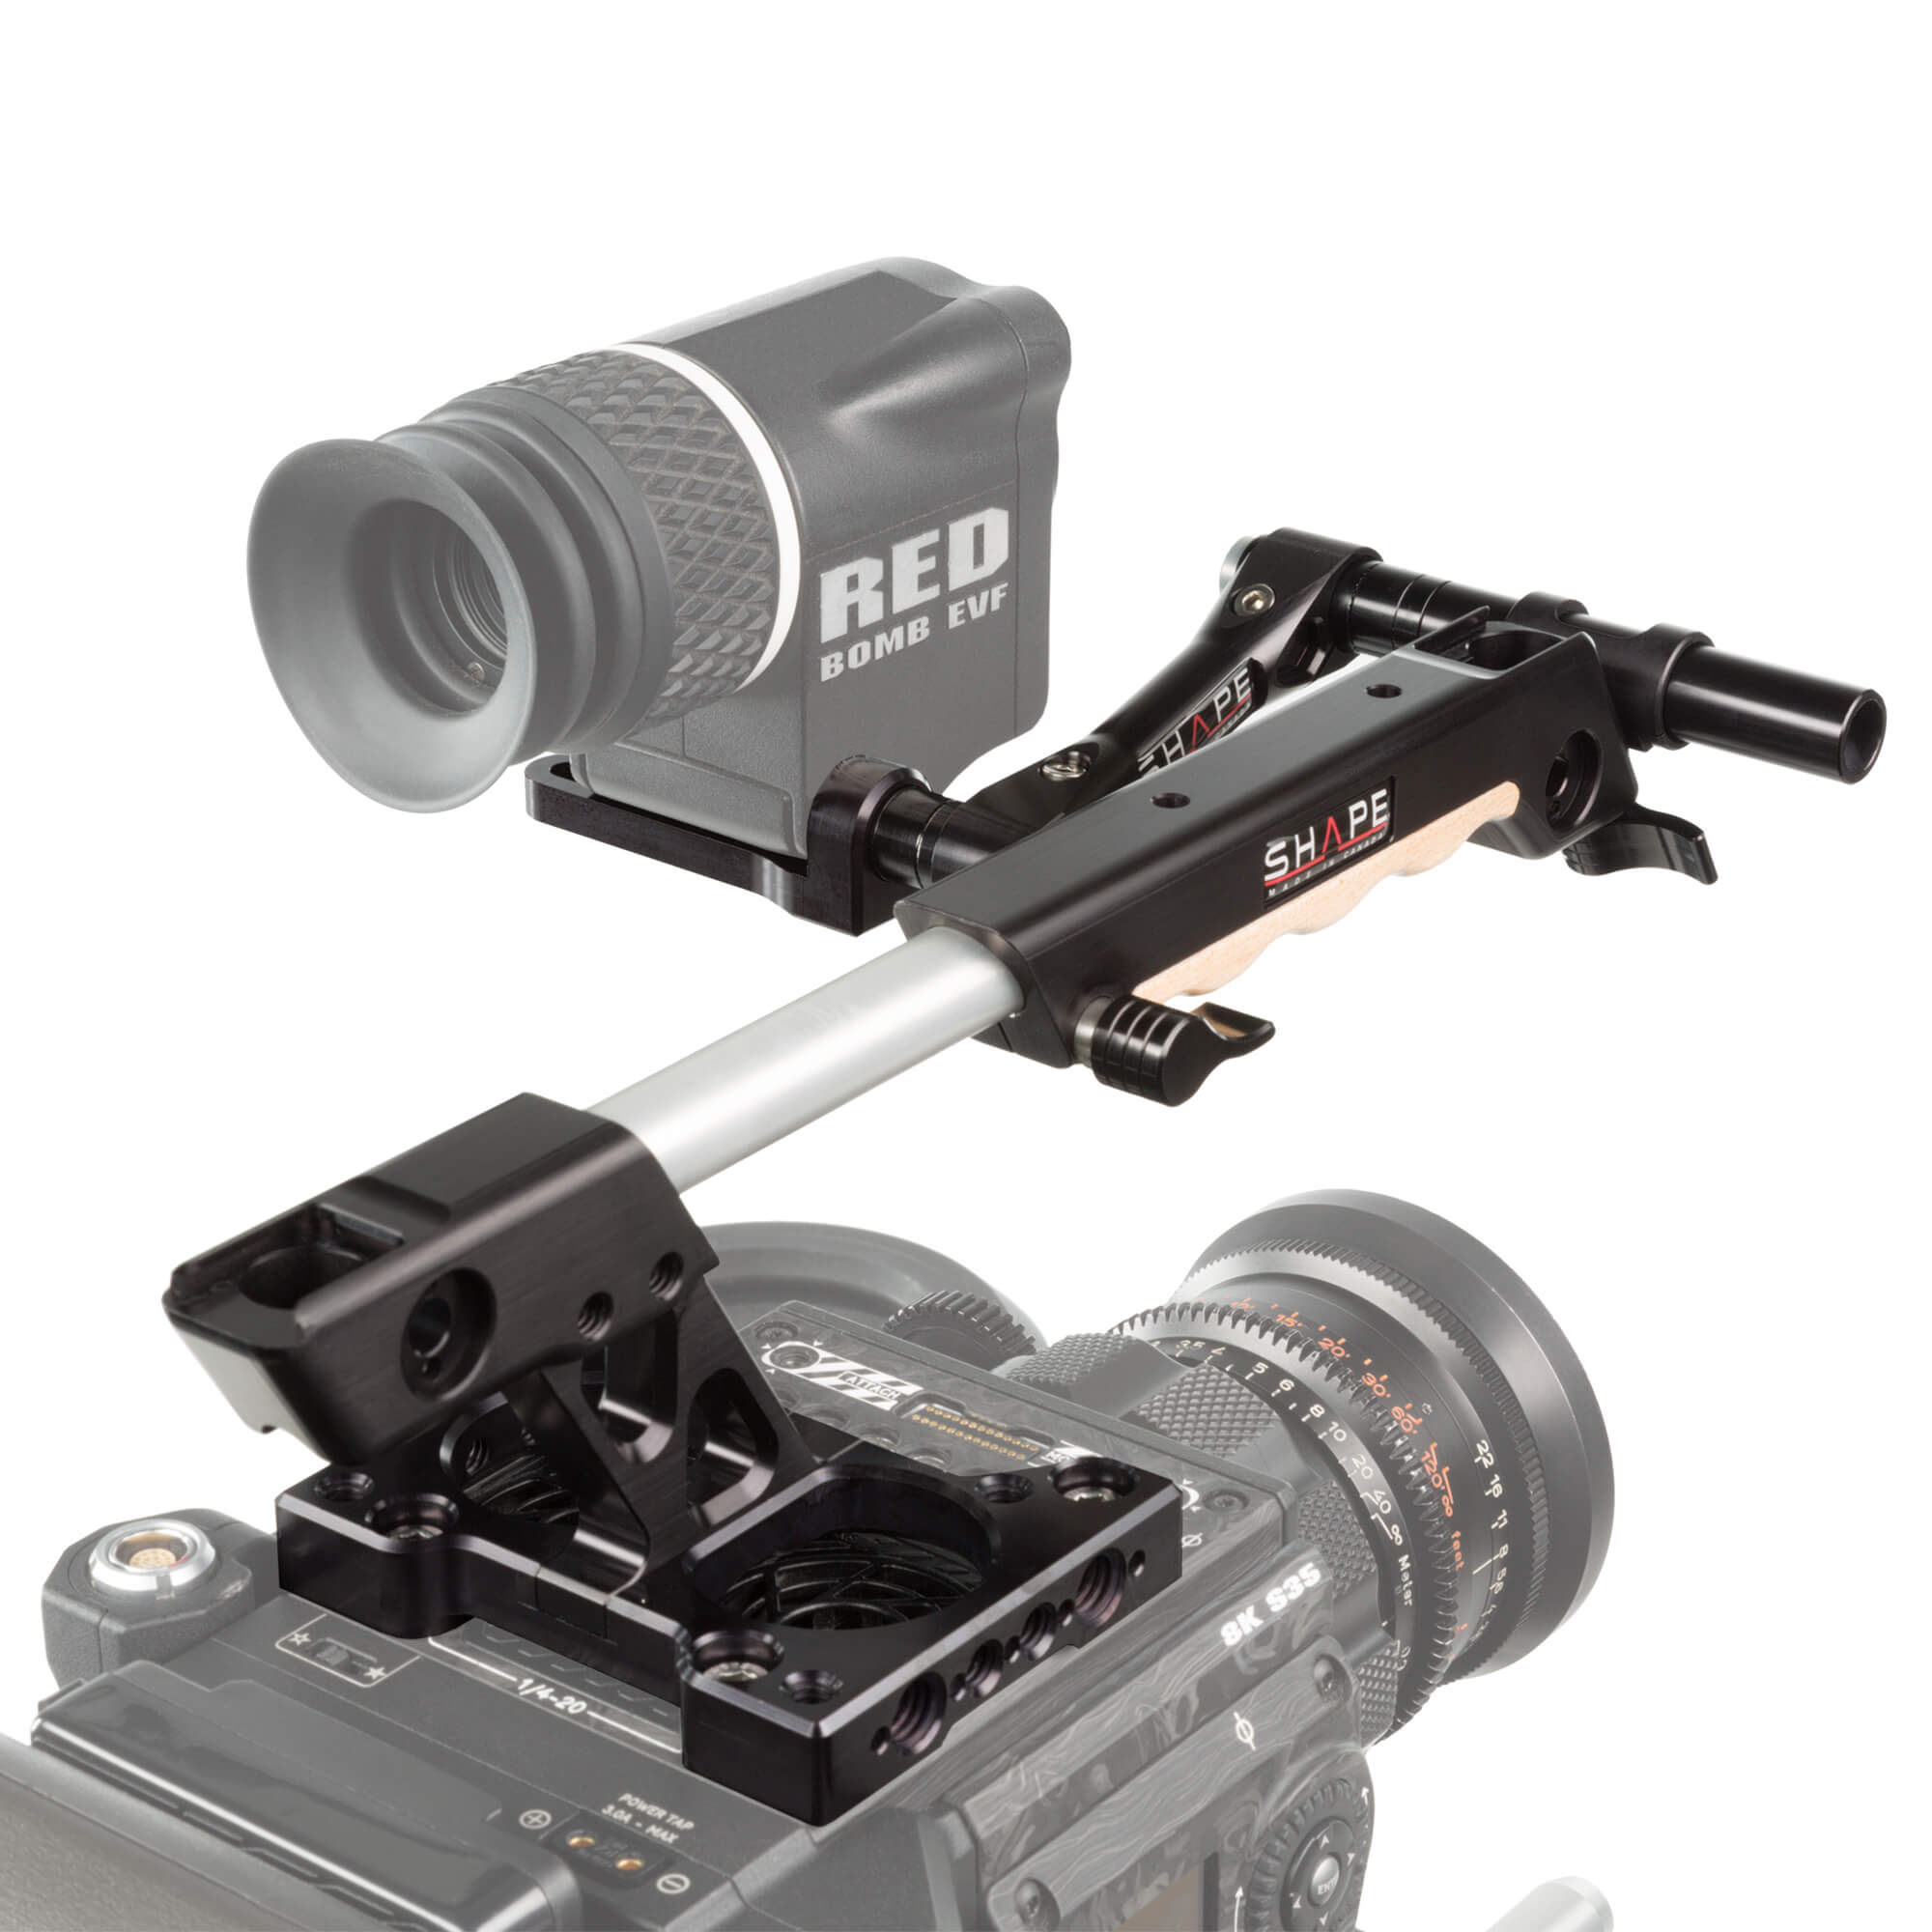 SHAPE Top Plate, Top Handle and View Finder Mount for RED® DSMC2